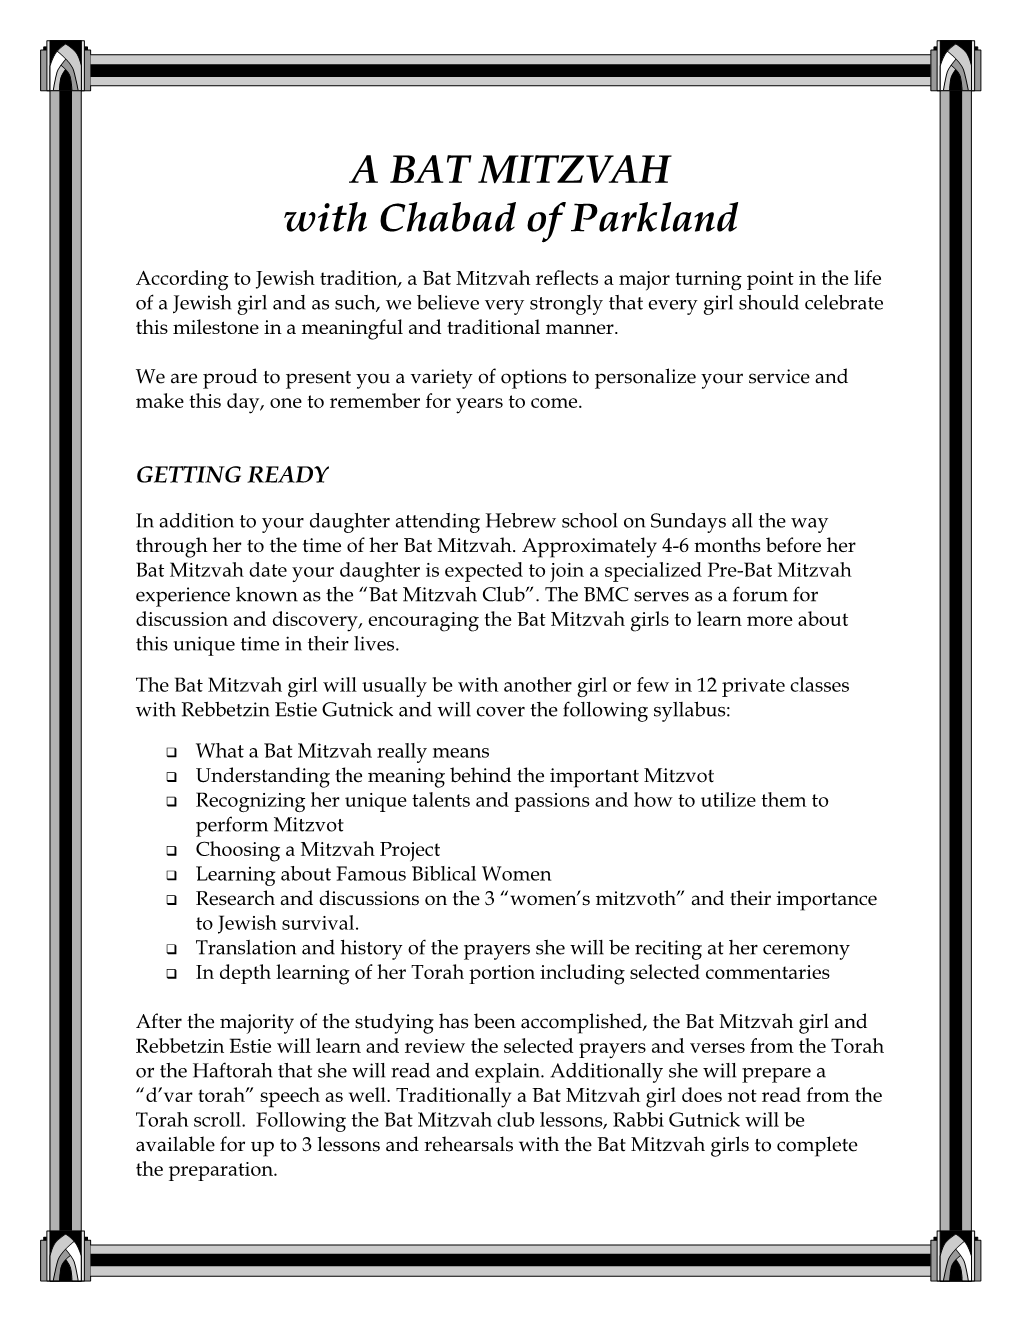 Bat Mitzvah Services Are Held Before Or After Shabbat)